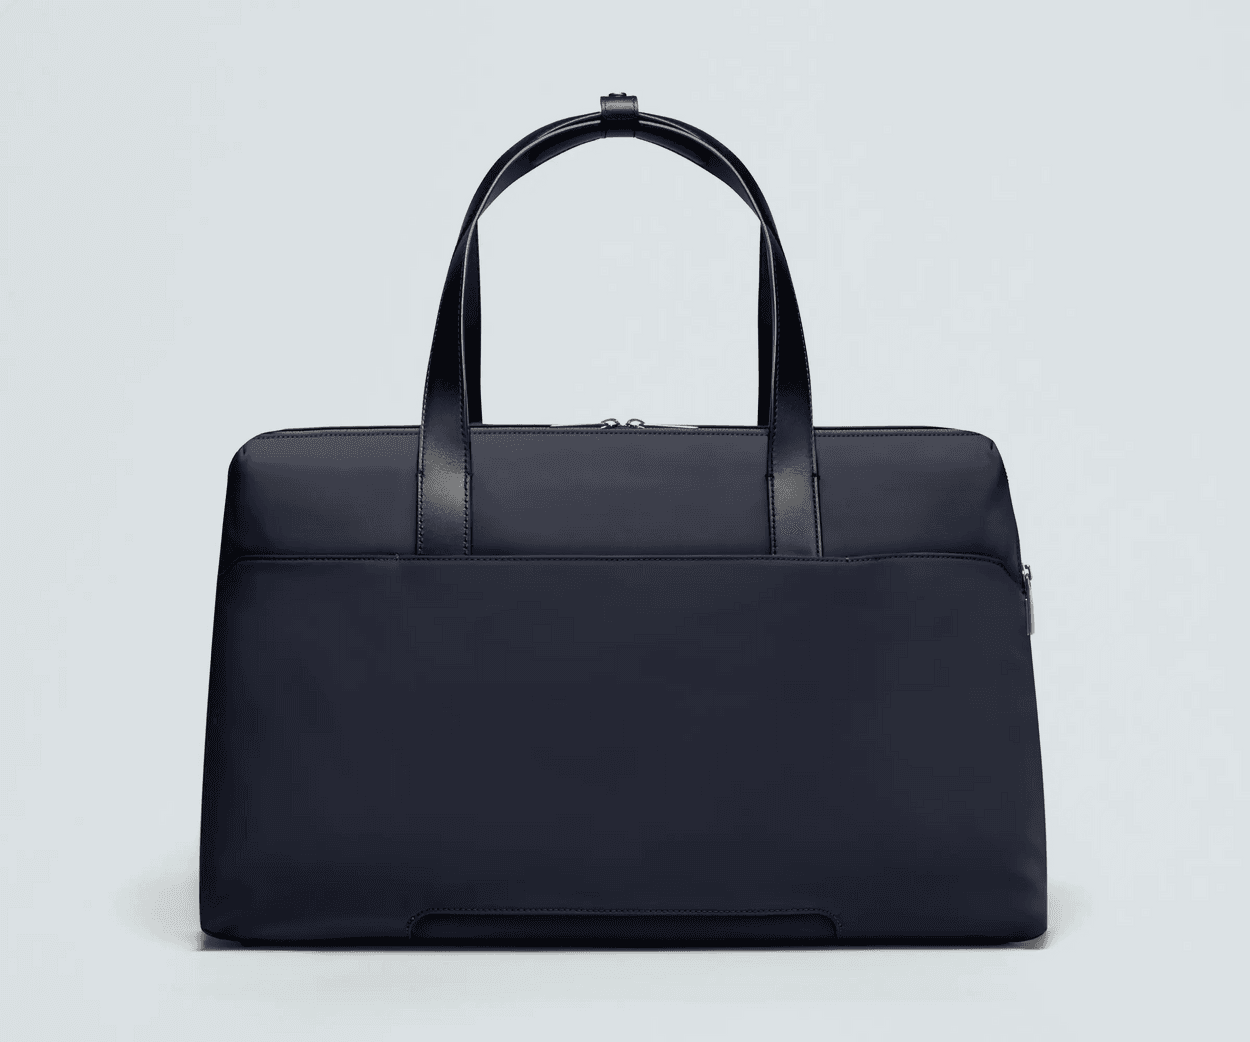 11 Of The Best Men's Bags For Work